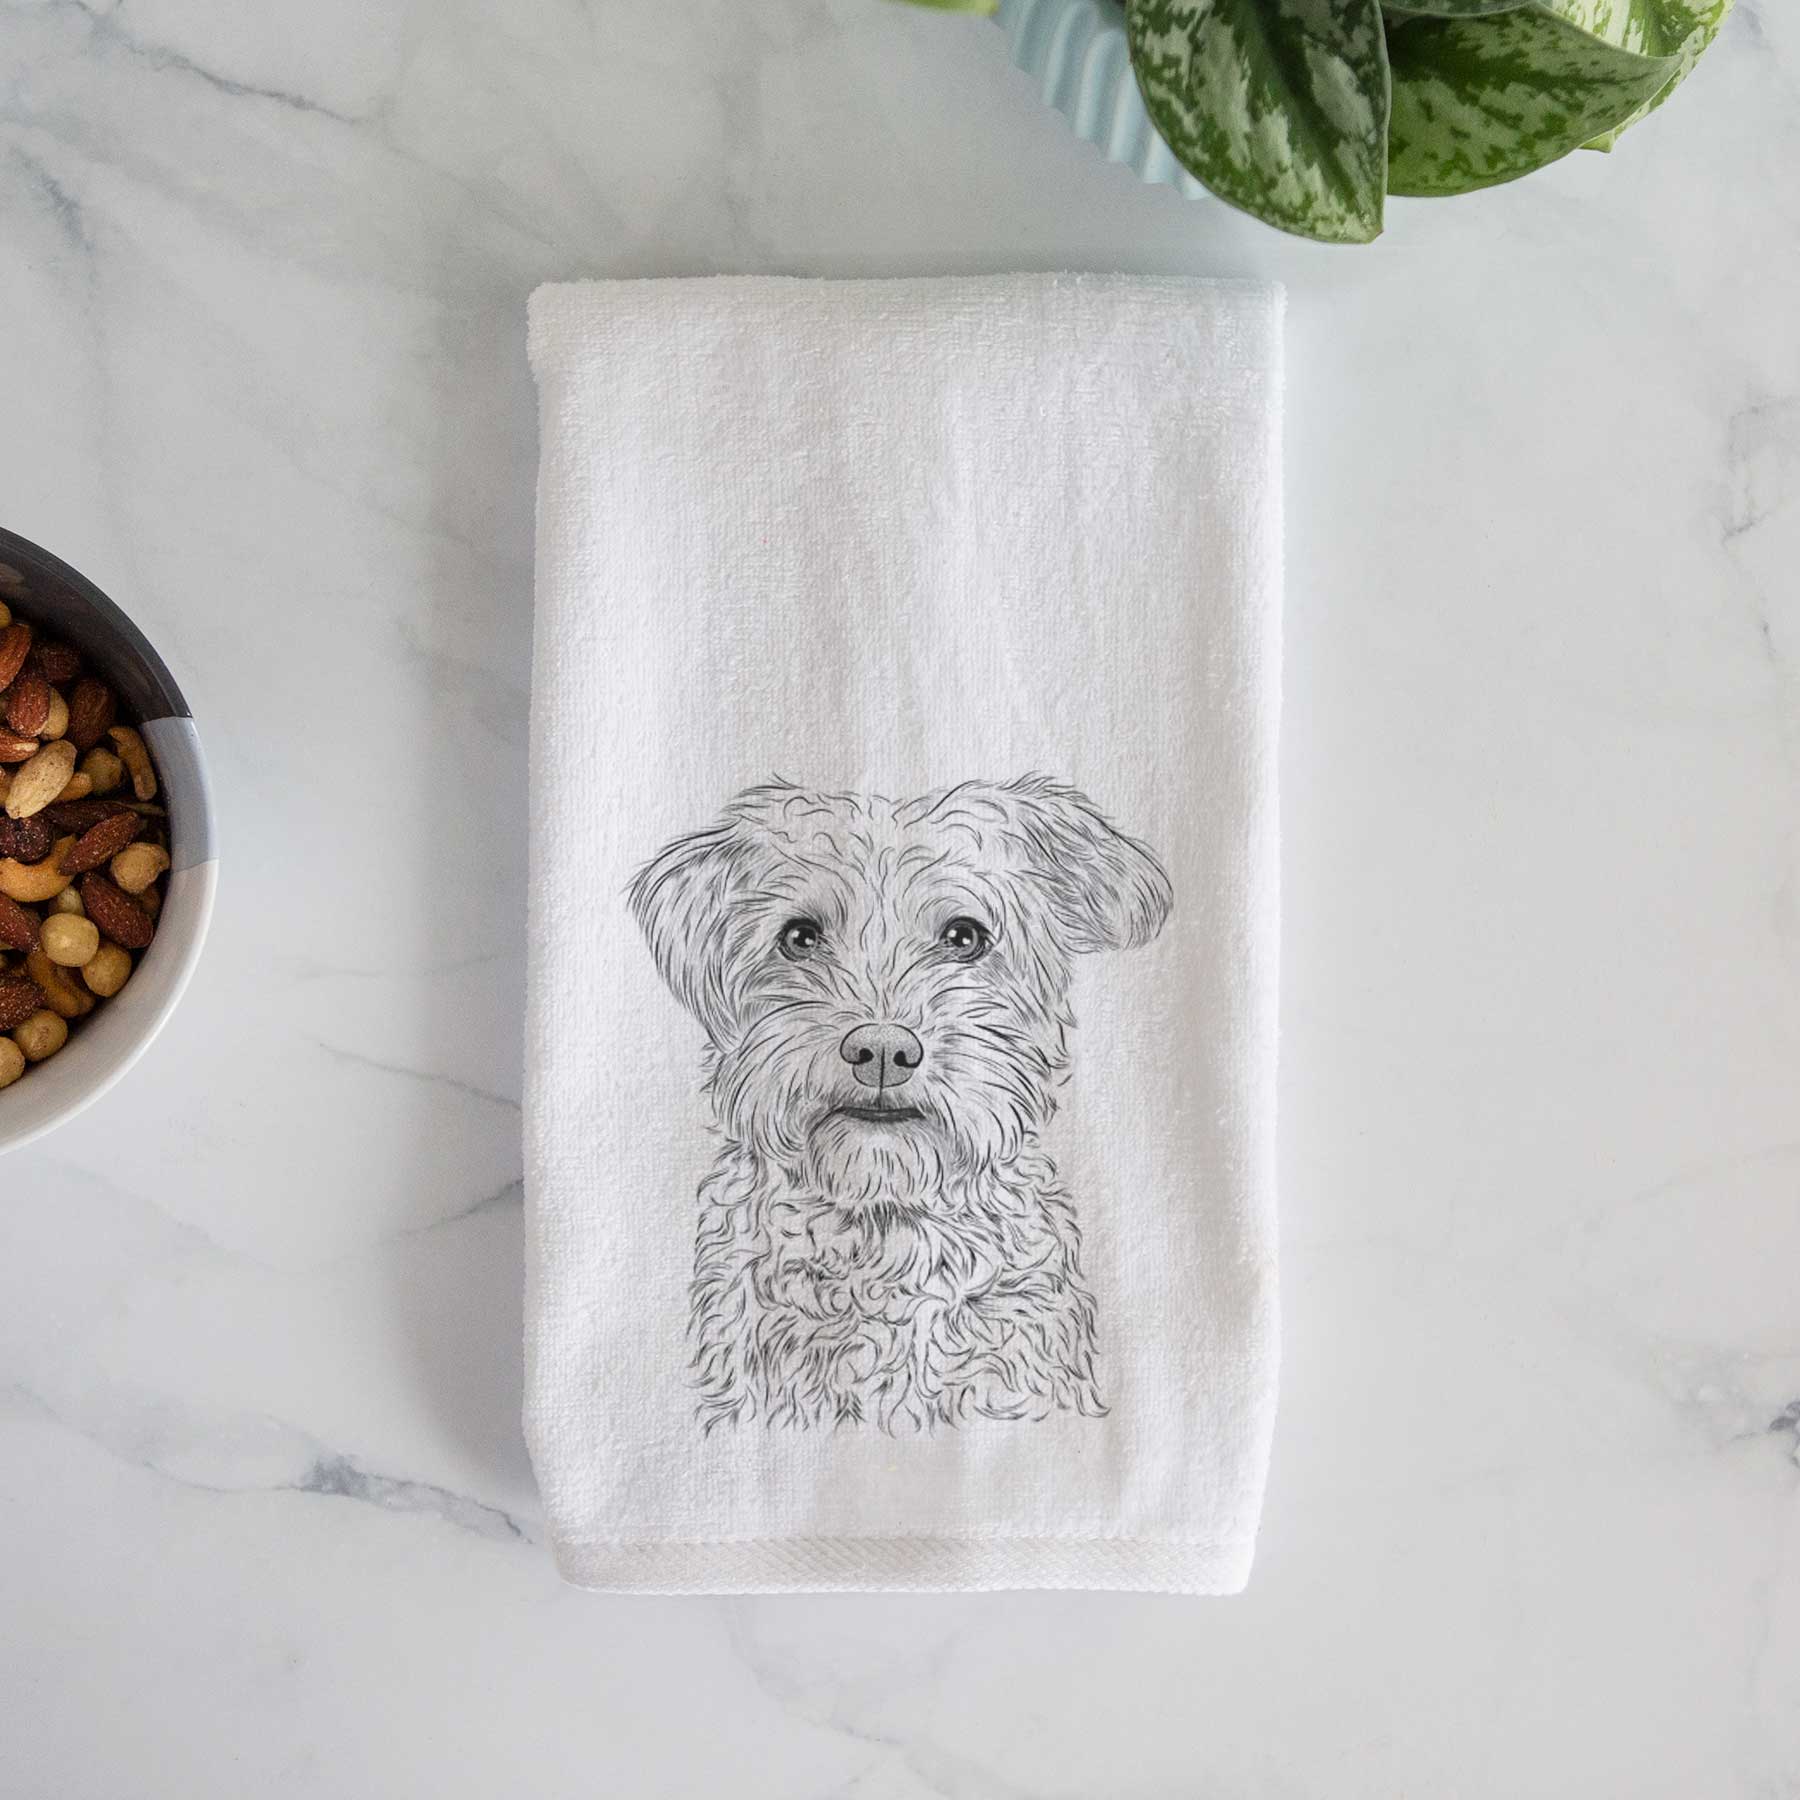 Rudy the Schnoodle Hand Towel